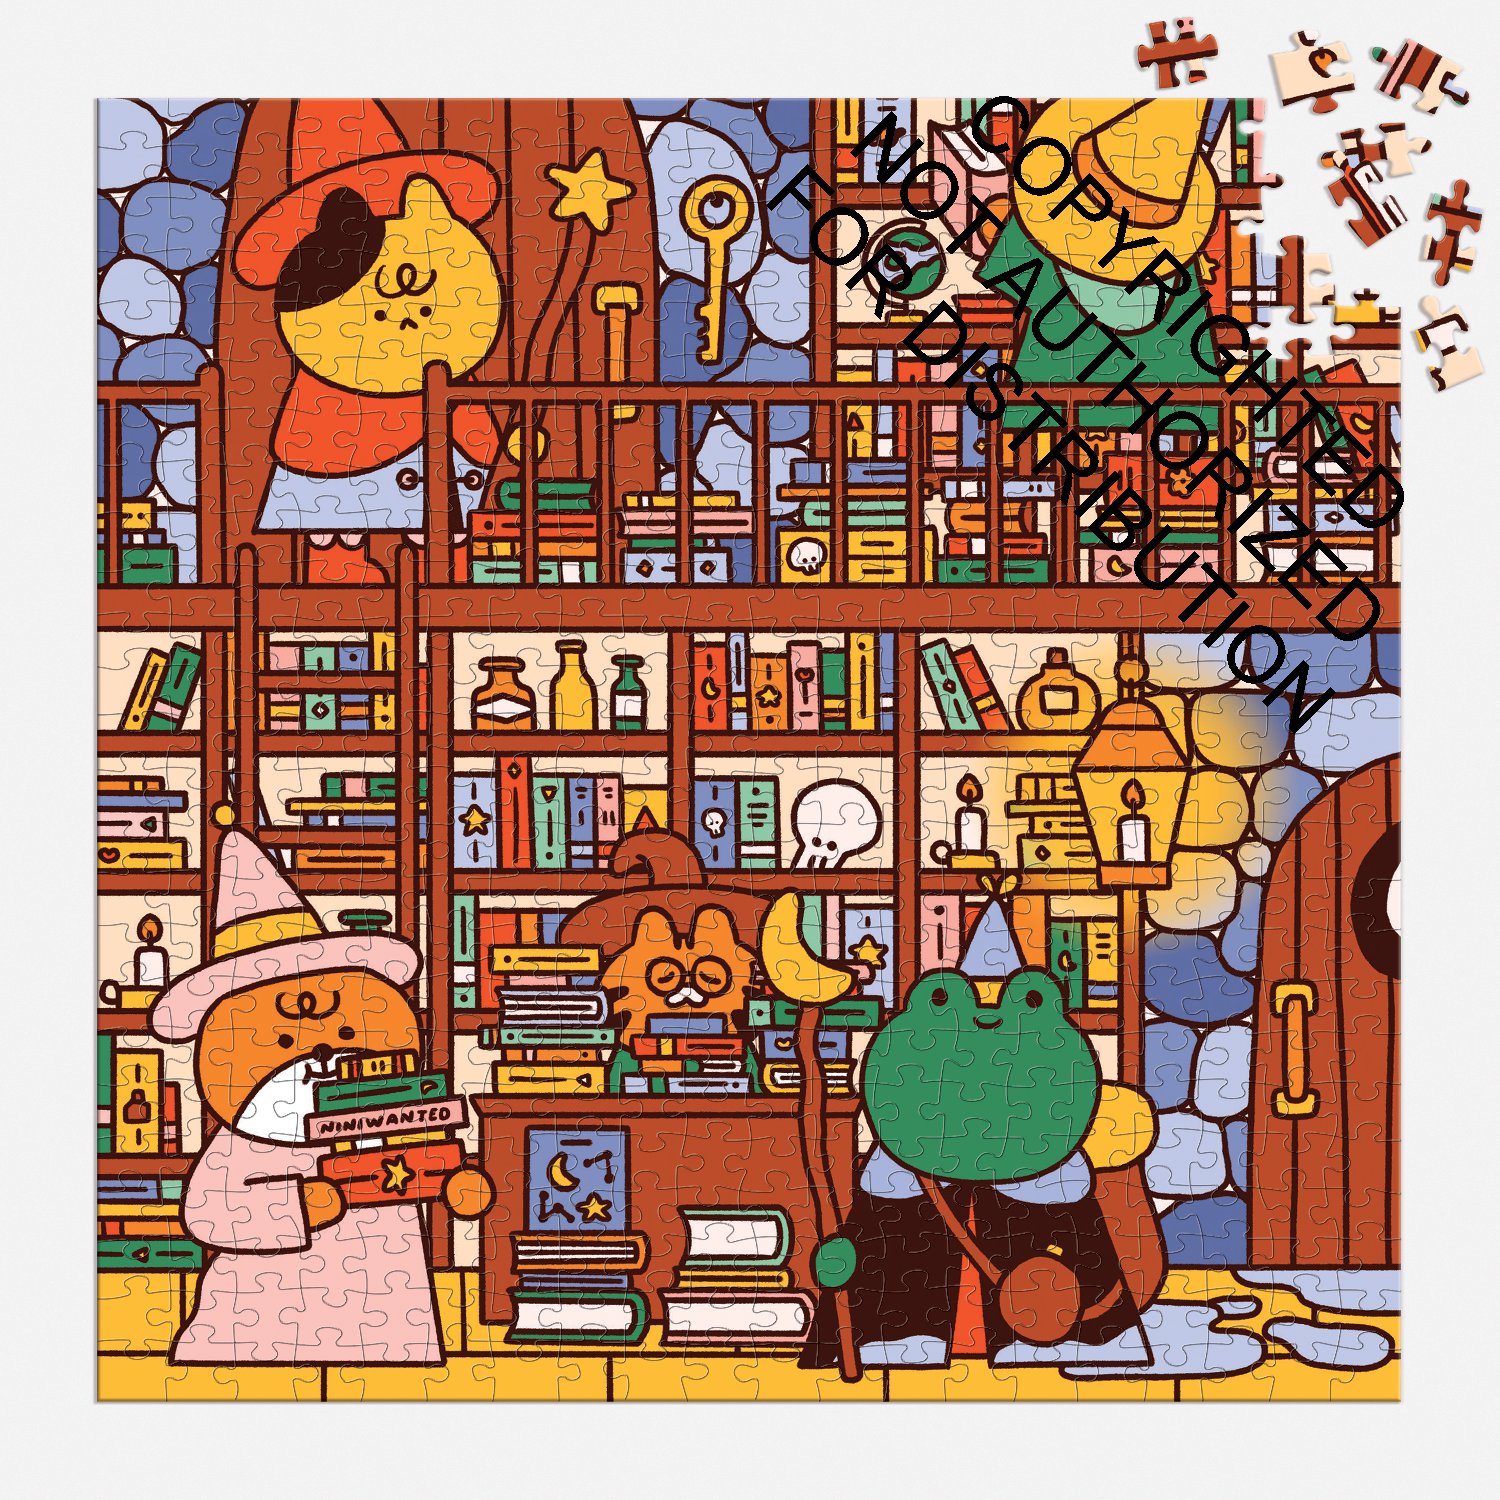 The Wizard's Library 500 Piece Family Puzzle